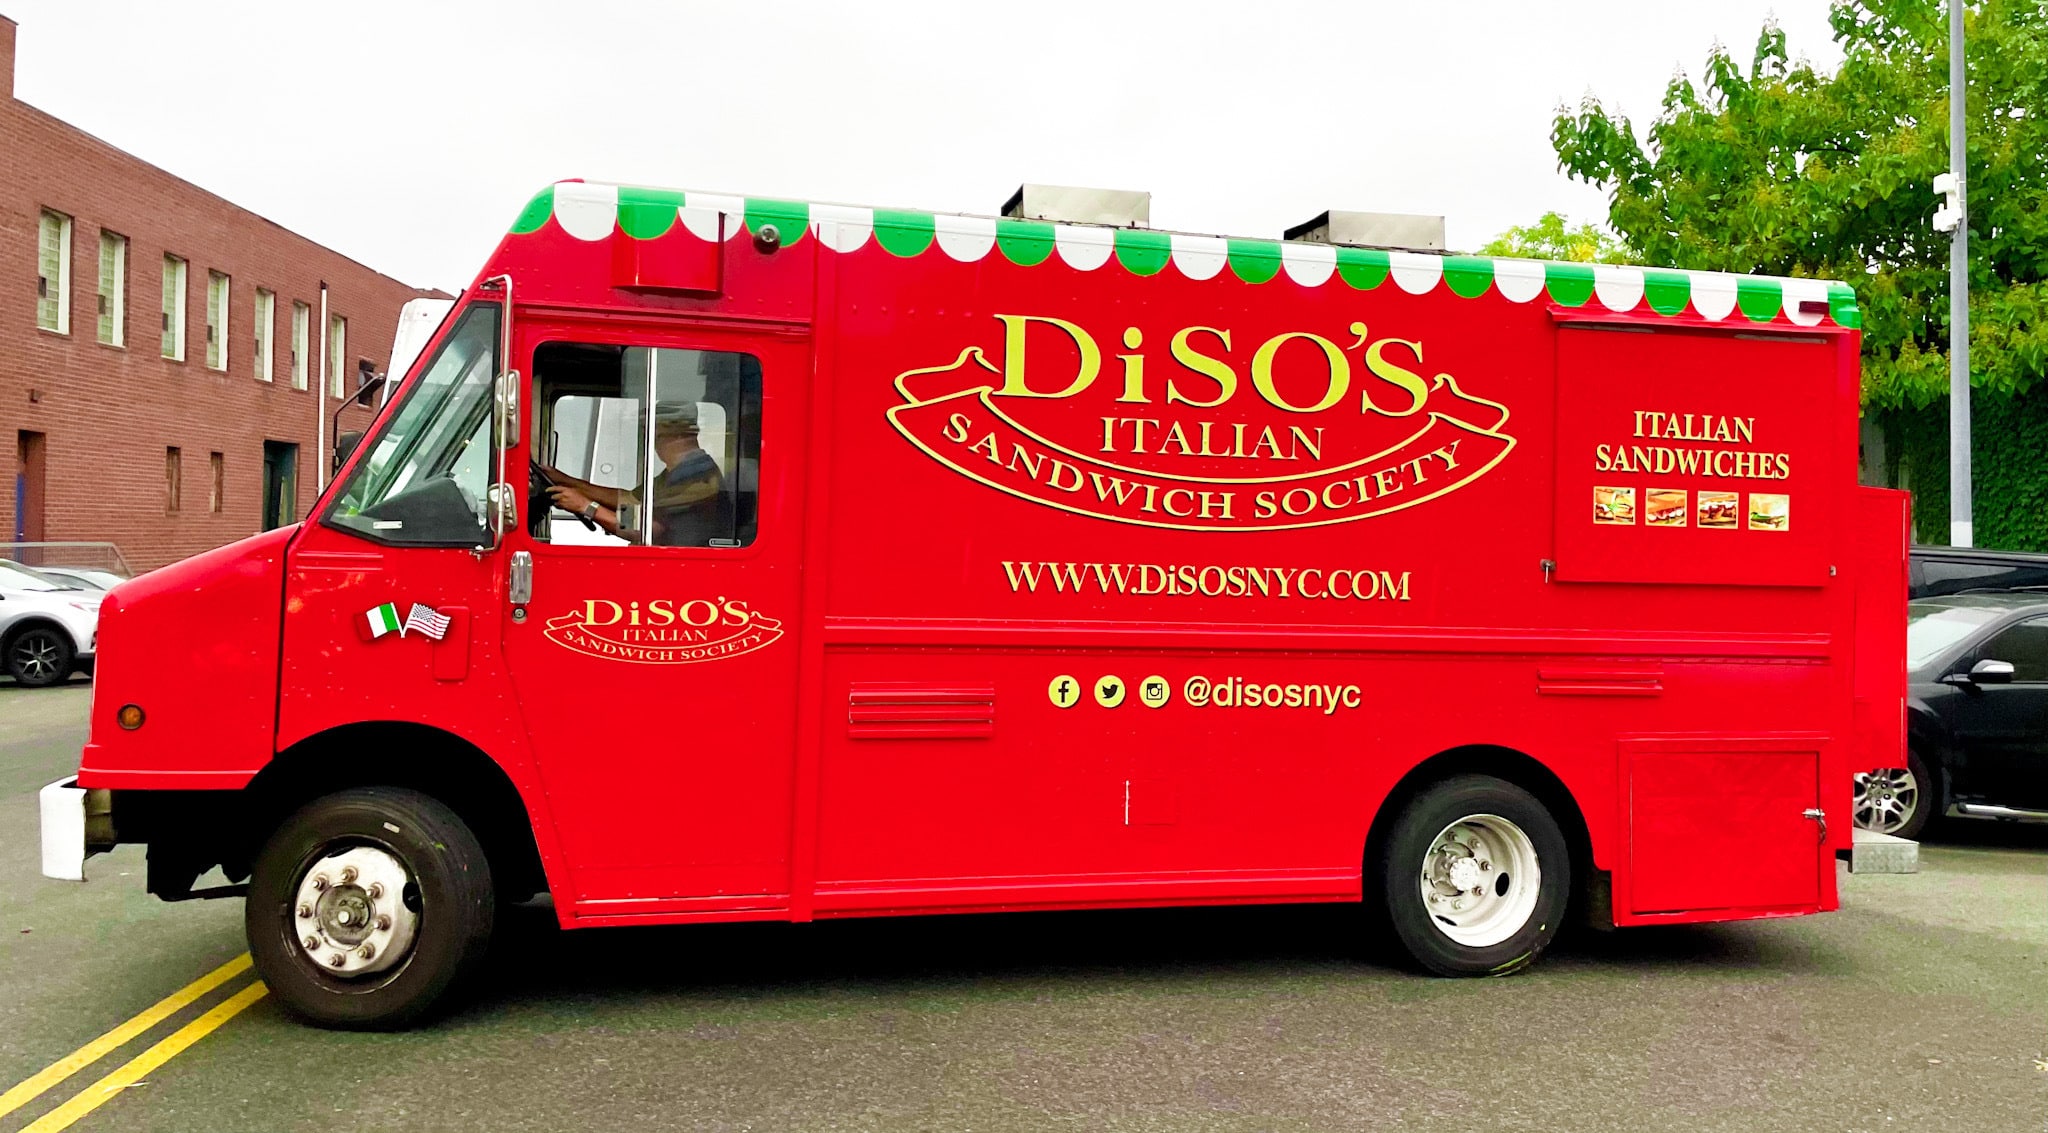 diso's italian sandwich truck parked in the streets of new york